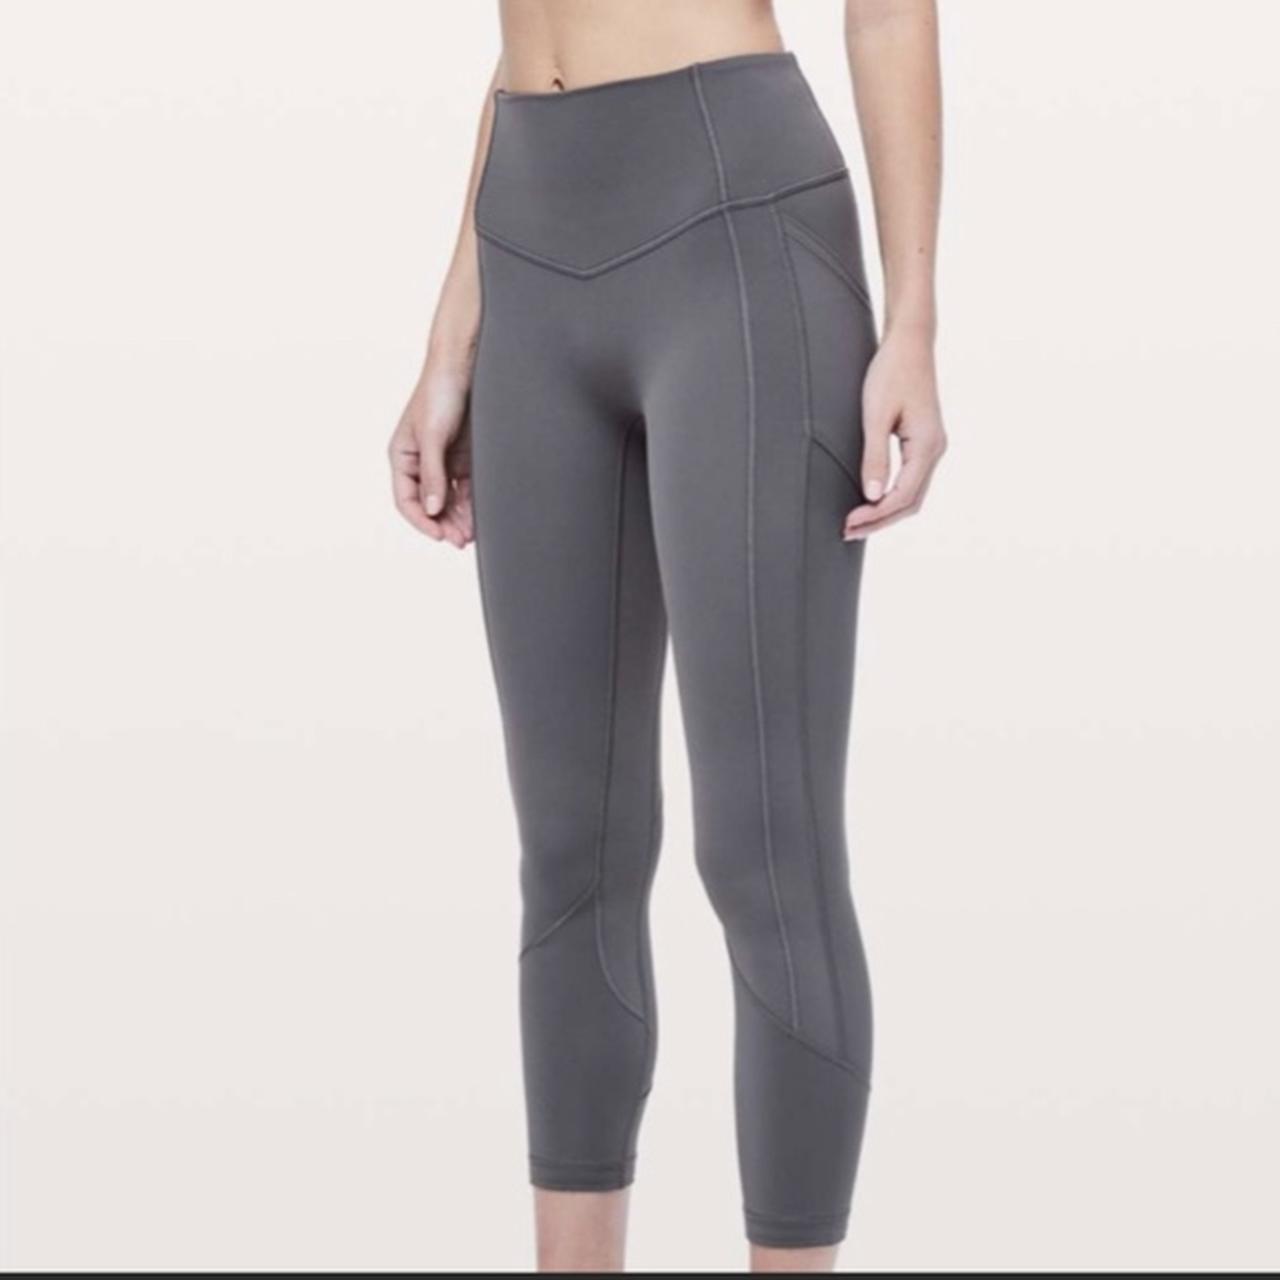 Lululemon All The Right Places Crop 23” in Titanium - Depop